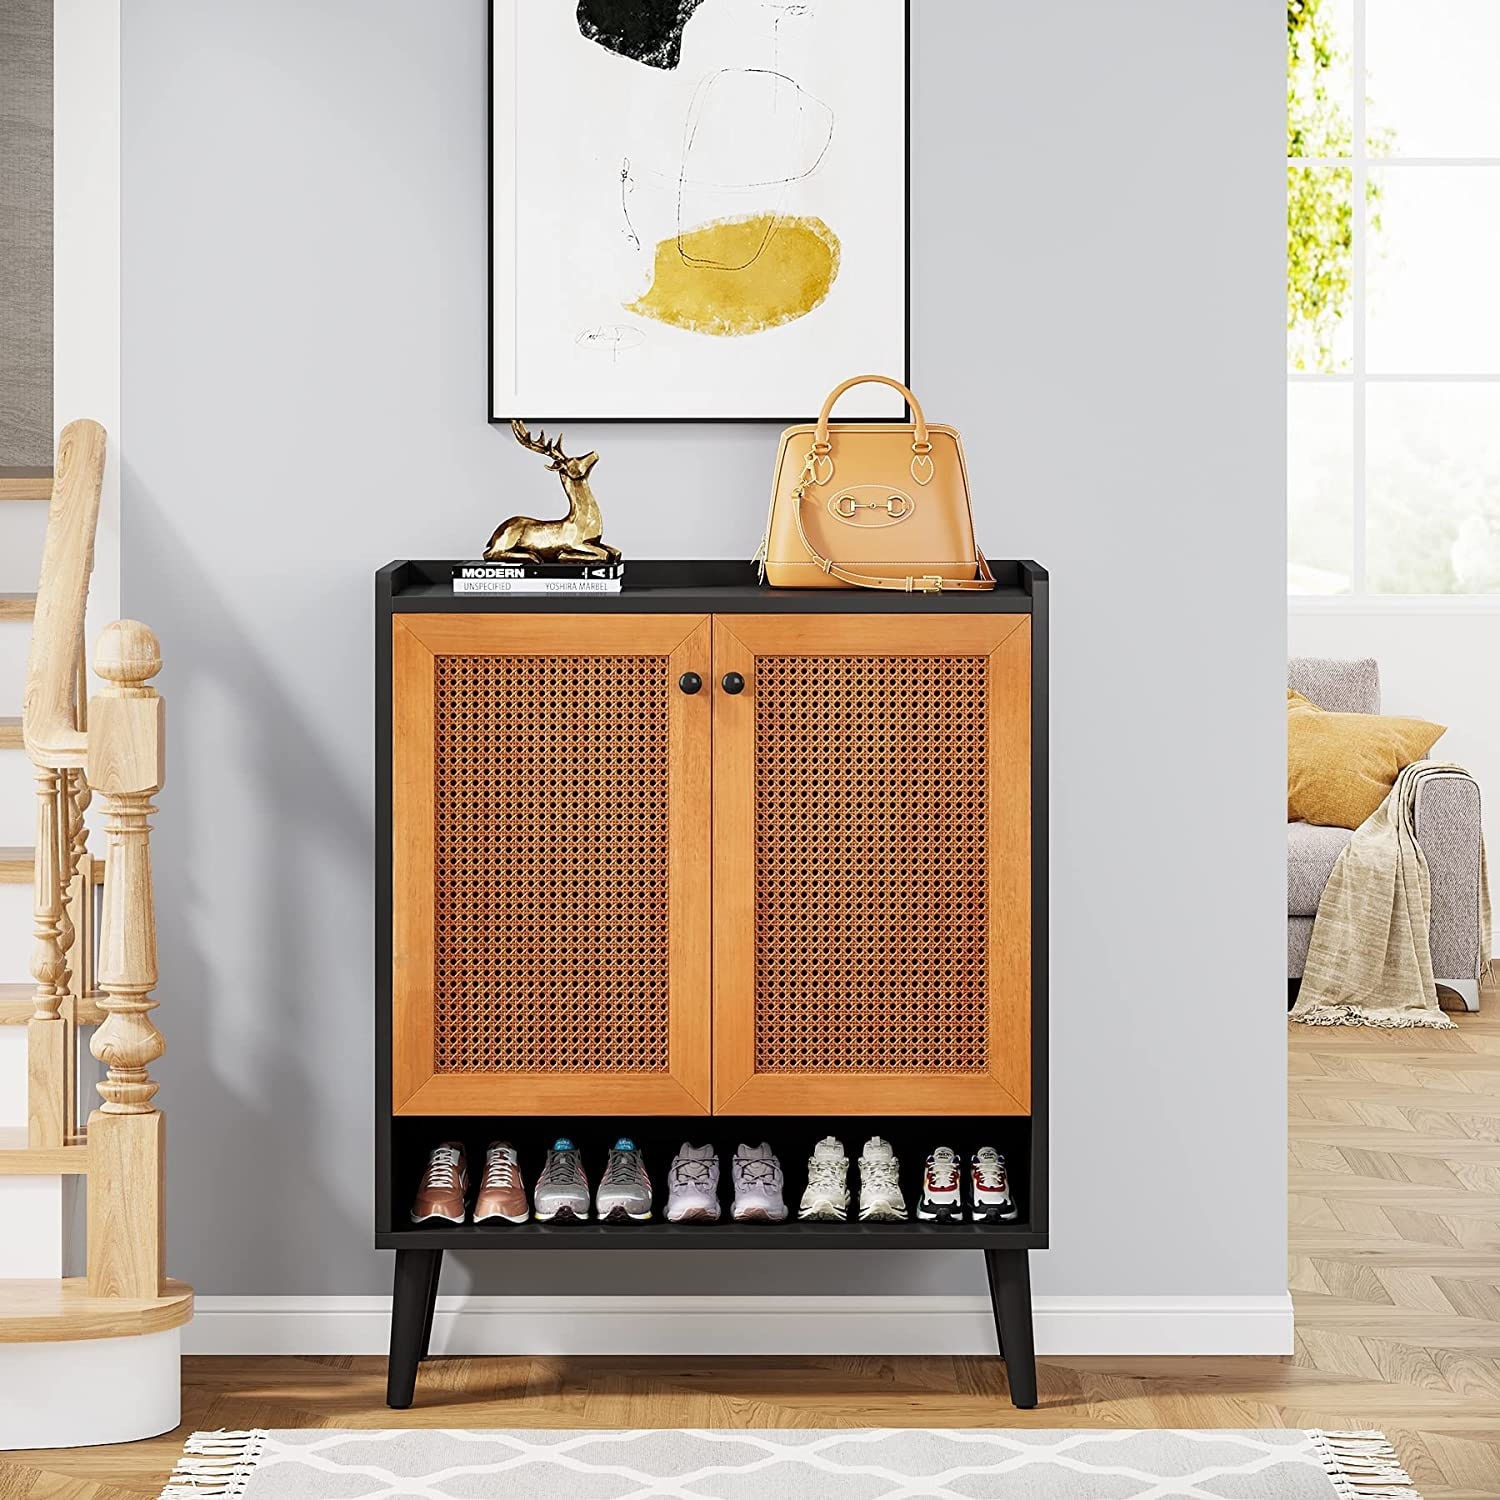 https://ak1.ostkcdn.com/images/products/is/images/direct/d78f012f1b2d1c4400d80a1bdedc2c95ae48c0b0/Shoe-Cabinet%2C-Rattan-Shoe-Rack-Organizer%2C-6-Tiers-24-30-Pairs-Heavy-Duty-Shoe-Storage-Cabinet-with-Doors-for-Entryway.jpg